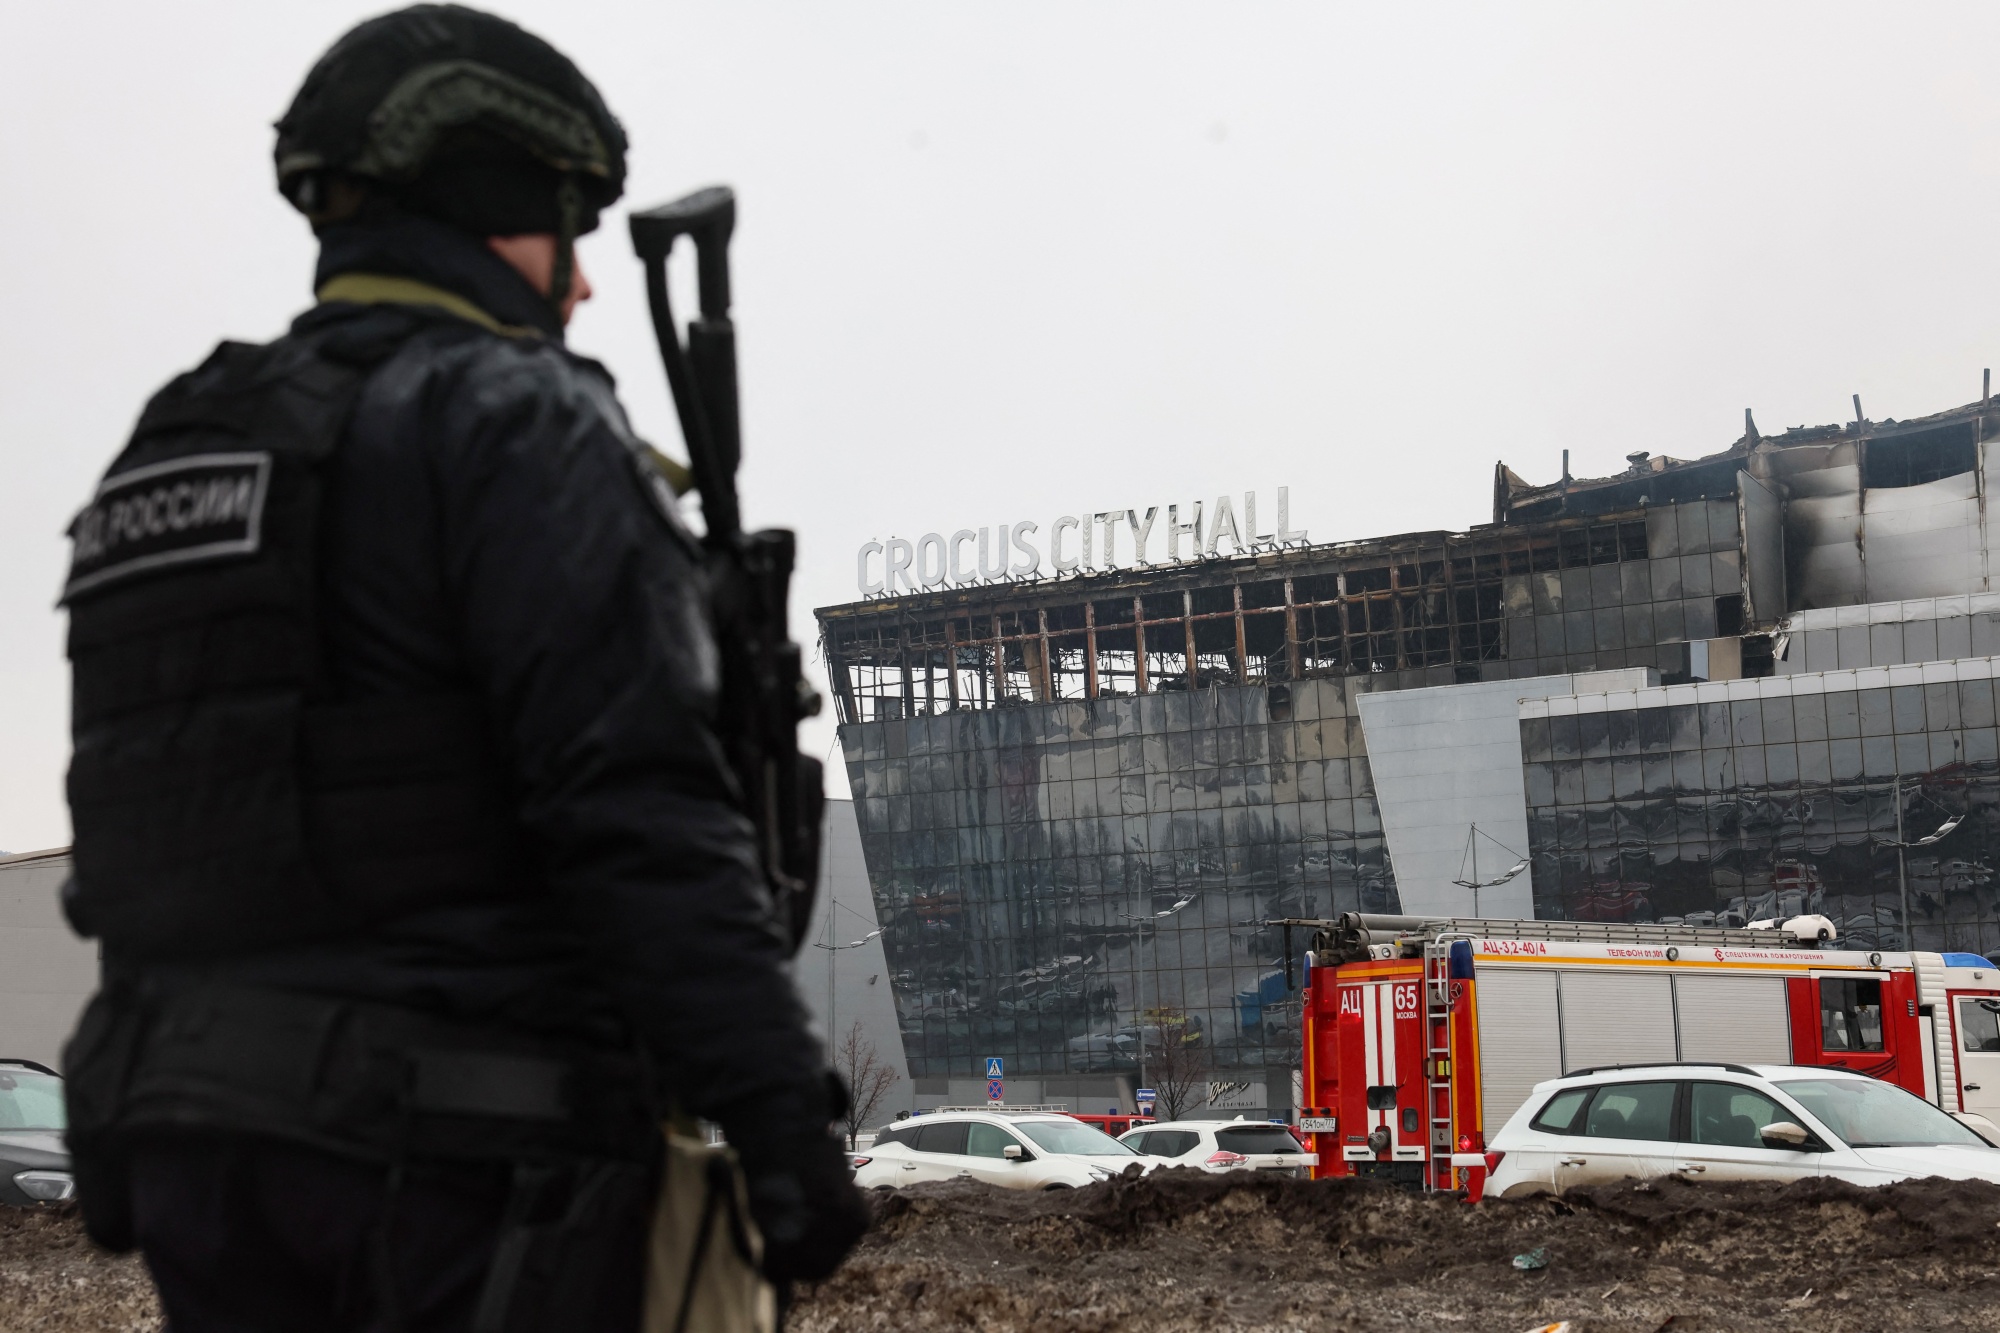 Moscow Concert Hall Attack Brings ISIS Return Into Global Focus - Bloomberg